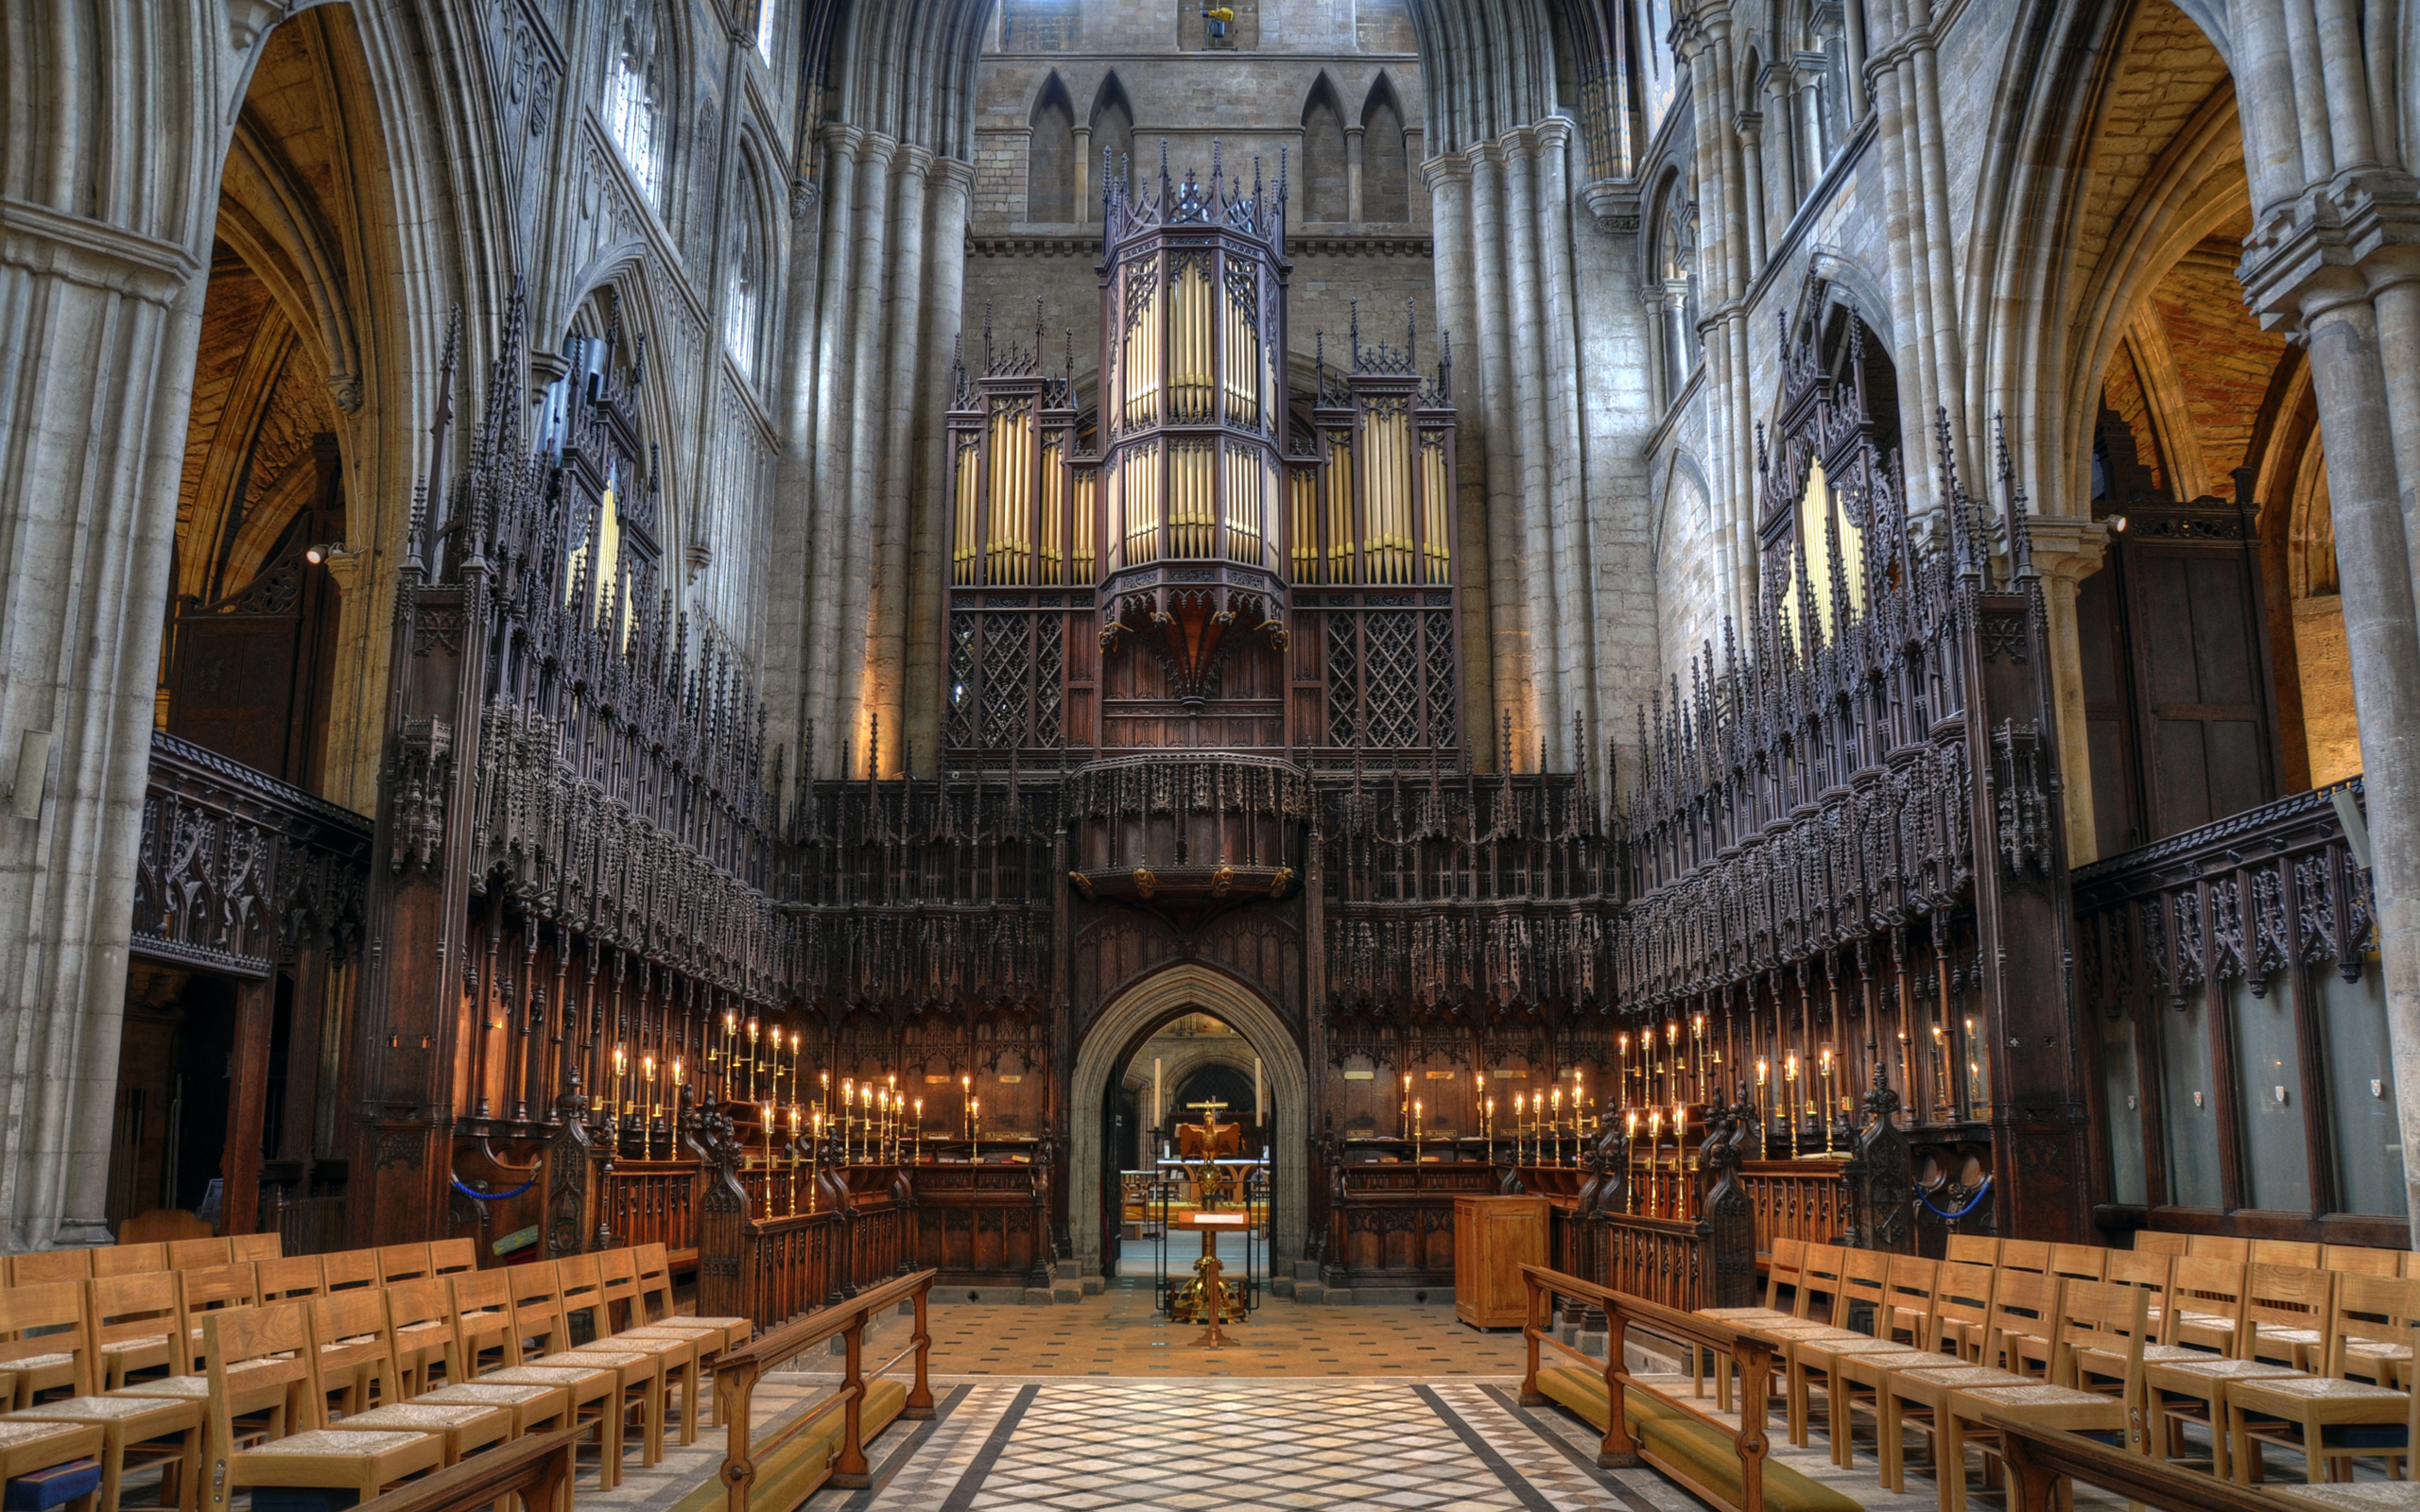 Ripon Cathedral Computer Wallpapers, Desktop Backgrounds | 2560x1600